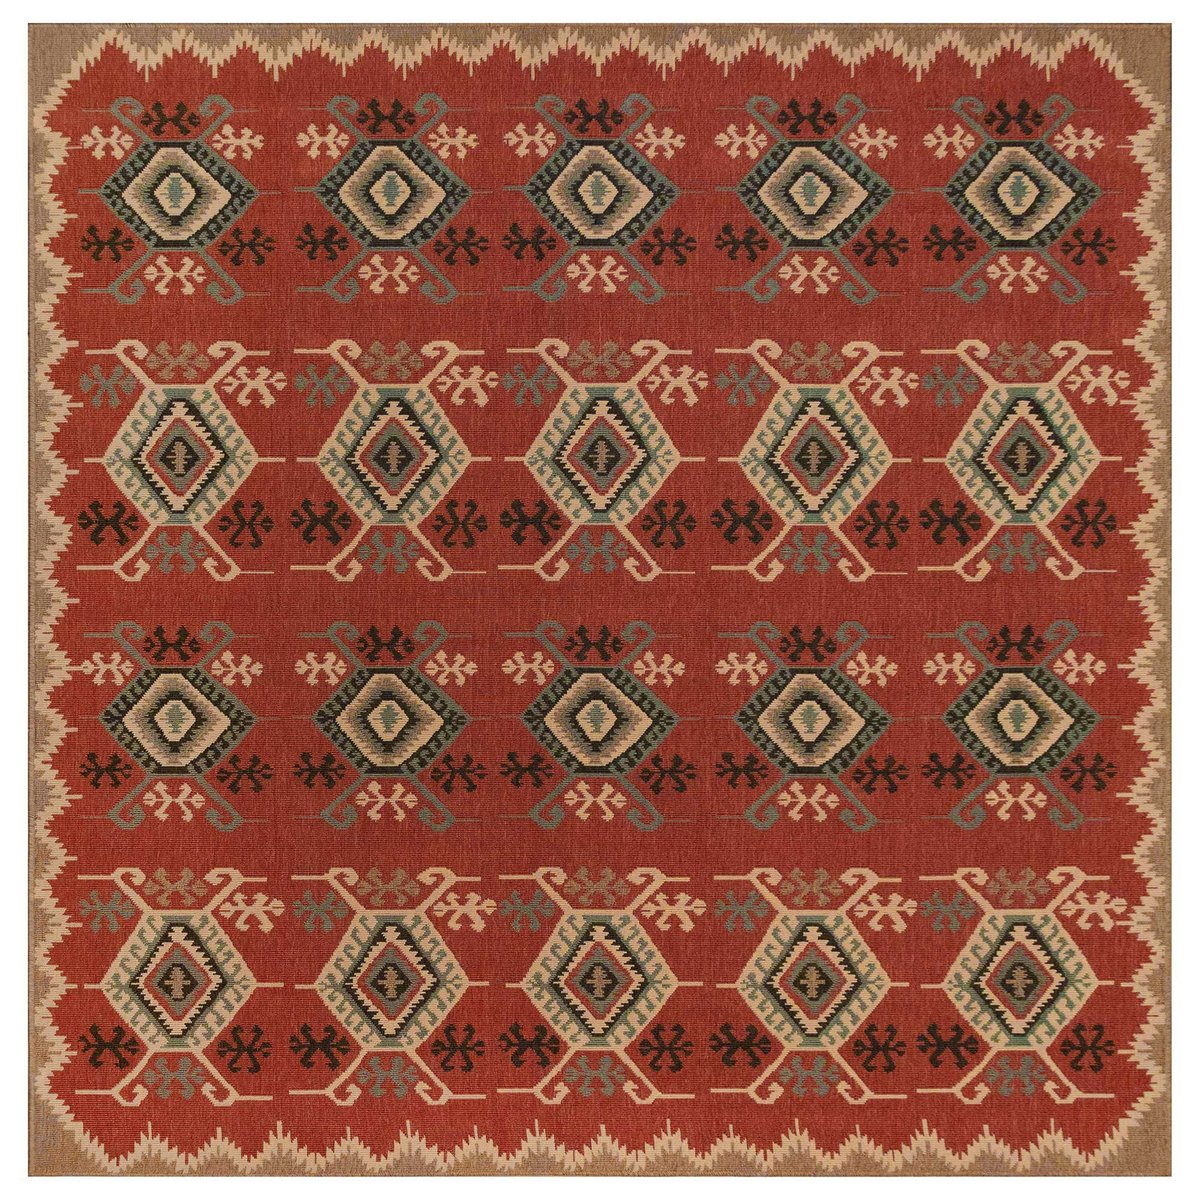 eCarpet Gallery Area Rug for Living Room Bold and Colorful Bordered Red Kilim 4'2 x 6'6 Bedroom Hand-Knotted Wool Rug 346280 